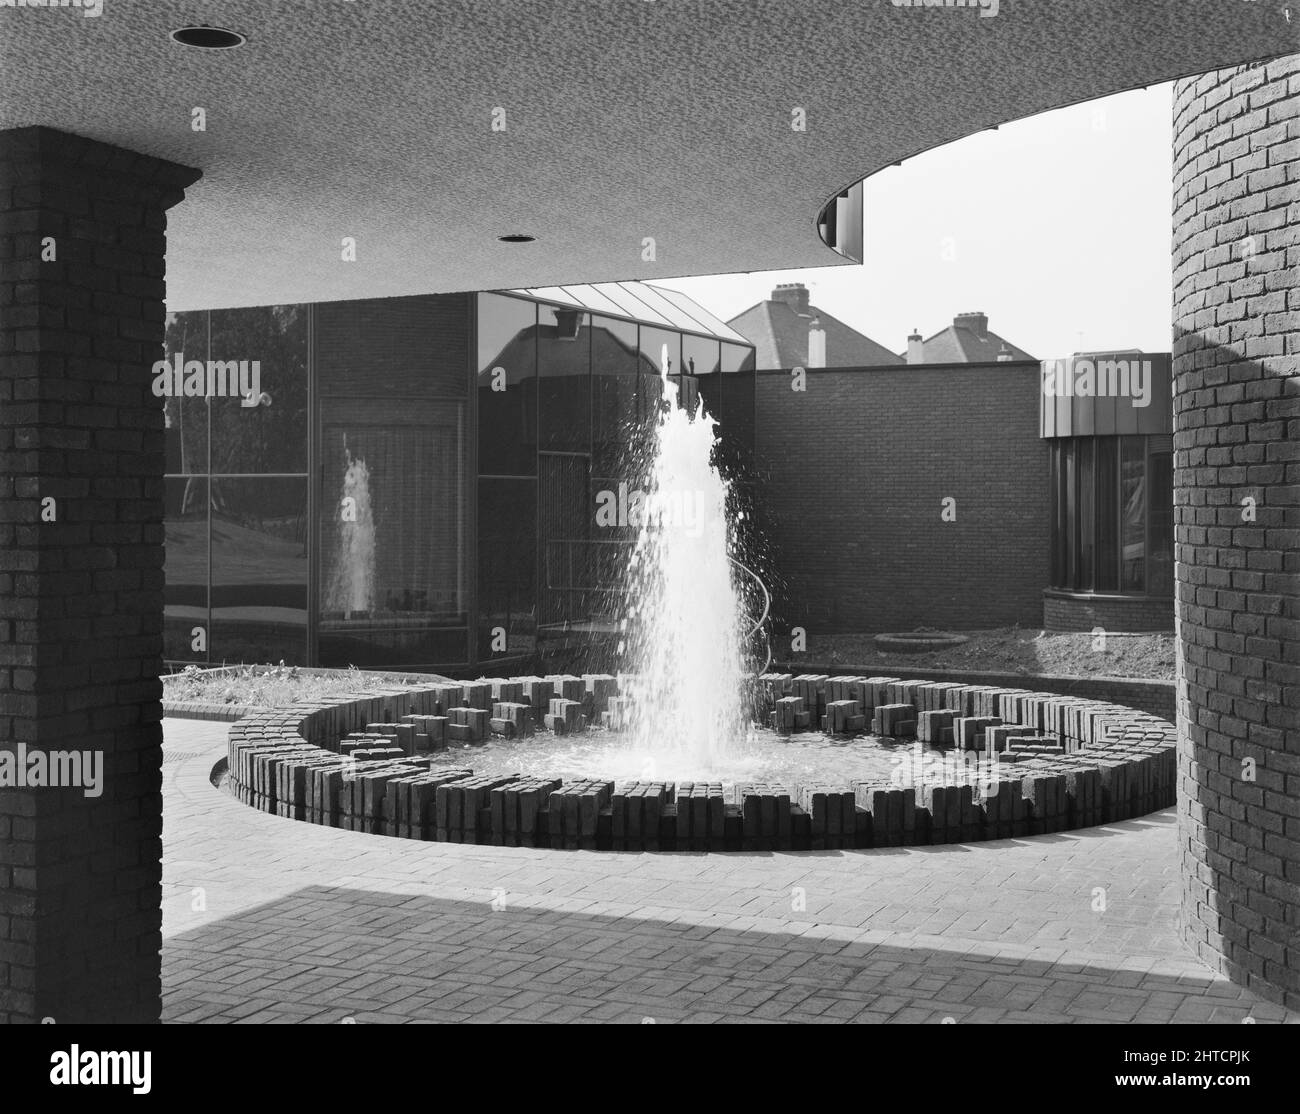 Sir John Laing Building, Page Street, Mill Hill, Barnet, London, 15/05/1981. A fountain outside the front entrance of the Sir John Laing Building, Mill Hill. The Sir John Laing Building, named in honour of the company's president who died in January 1978 at the age of 98, was built between 1977 and 1980 having been planned since 1974.  The building completed a phase of development at Laing's Mill Hill headquarters complex, an area that the firm had occupied since moving from Carlisle in 1922.  By 1988 however a major restructuring of the company and meant a wholesale relocation out of the Mill Stock Photo